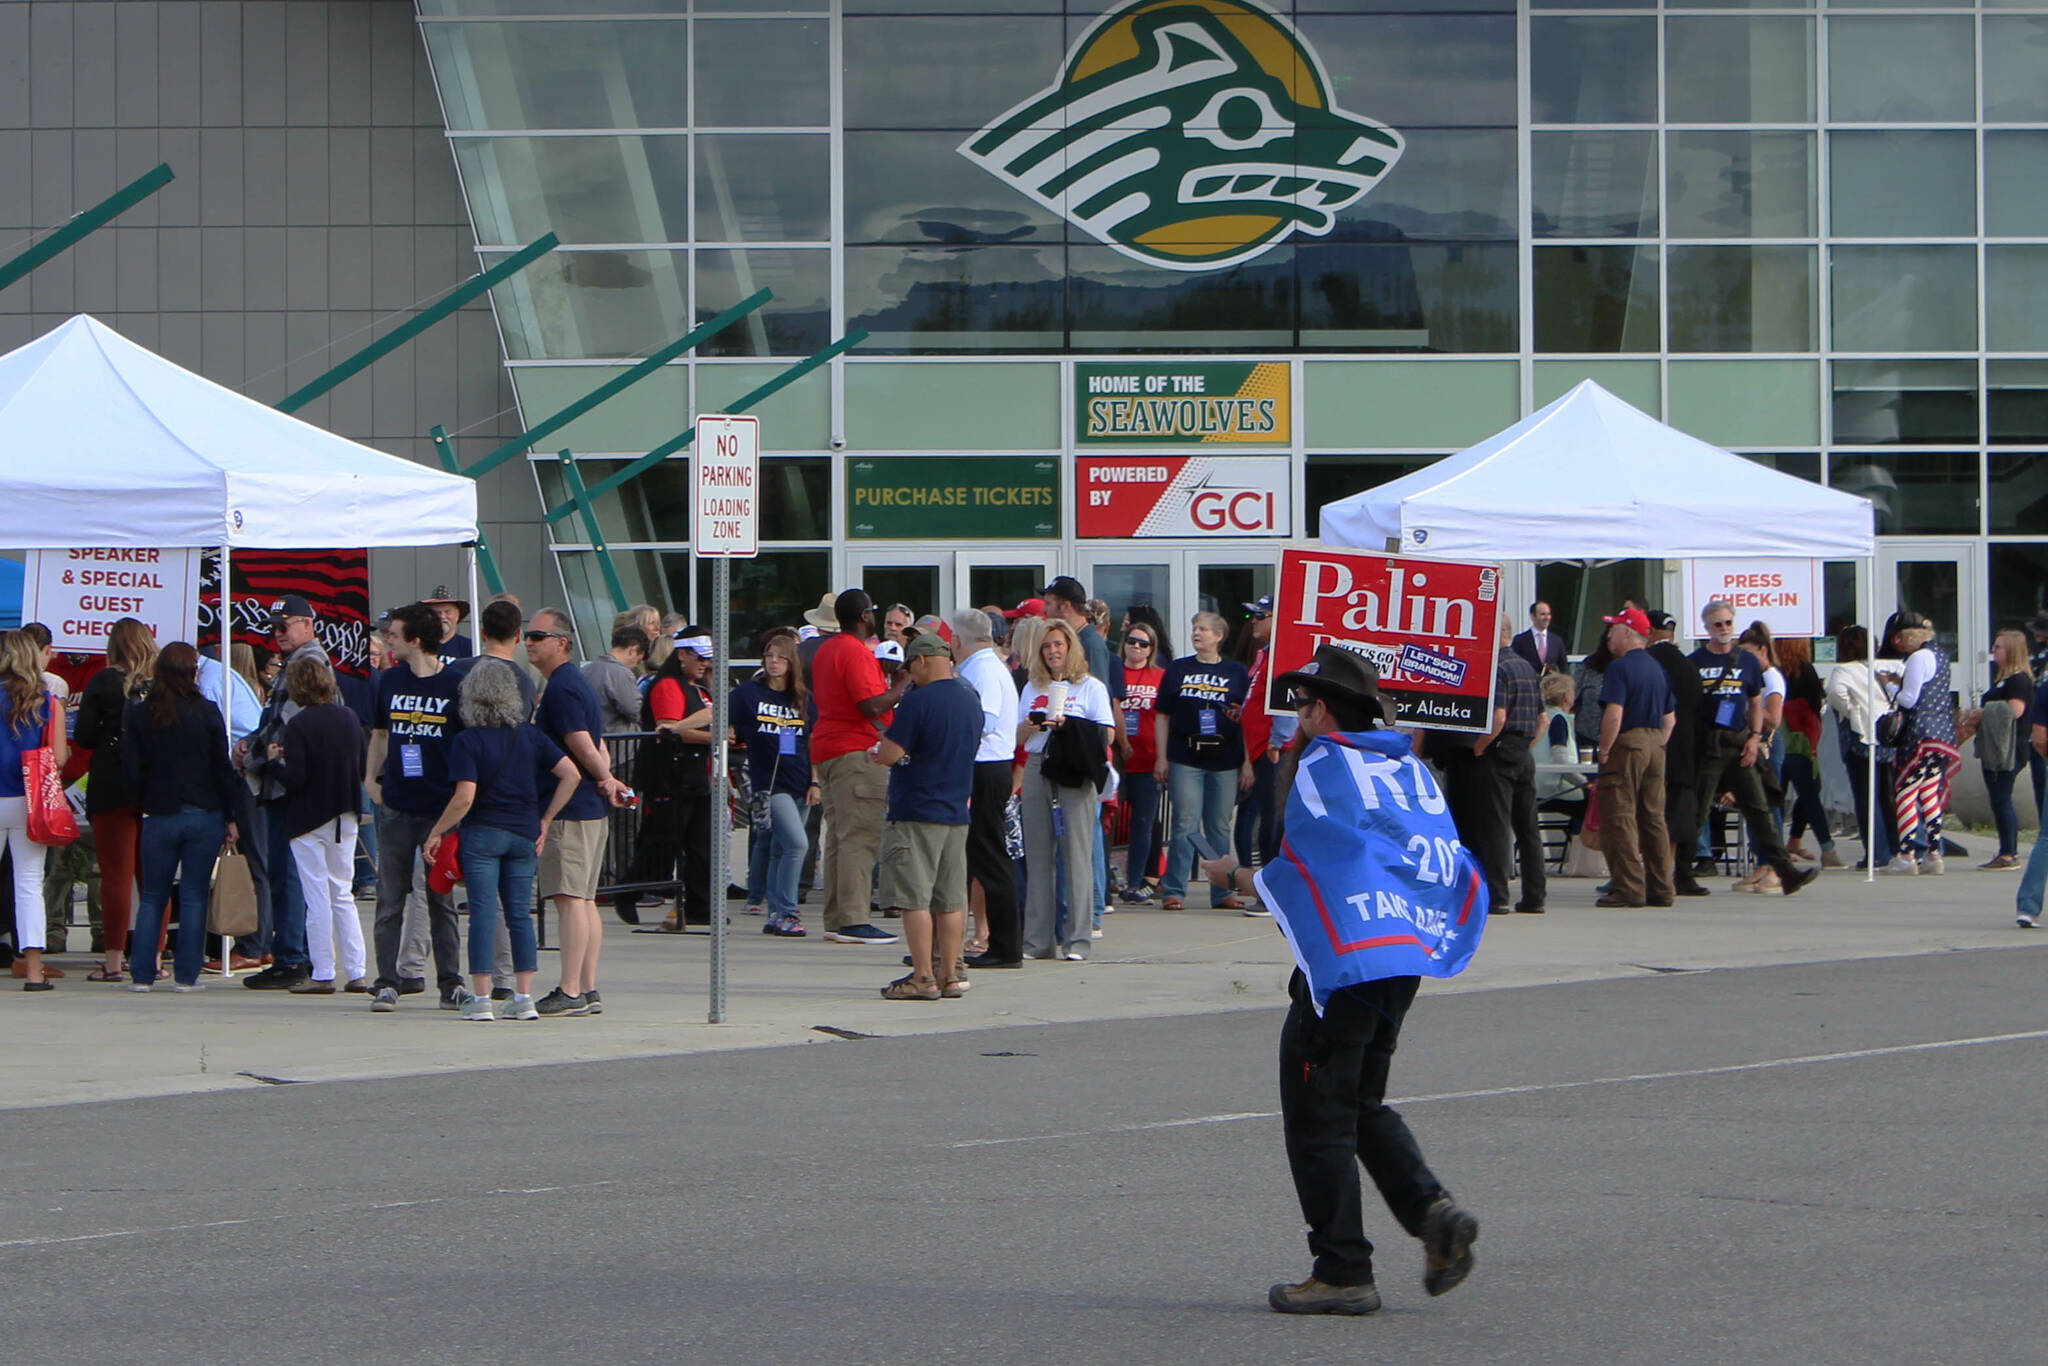 A man wearing a Trump flag crosses the street in front of the Alaska Airlines Center, where a Save America rally was being held, on Saturday, July 9, 2022, in Anchorage, Alaska. Former President Donald Trump, U.S. Senate candidate Kelly Tshibaka and U.S. House candidate Sarah Palin were among the event’s speakers. (Ashlyn O’Hara/Peninsula Clarion)